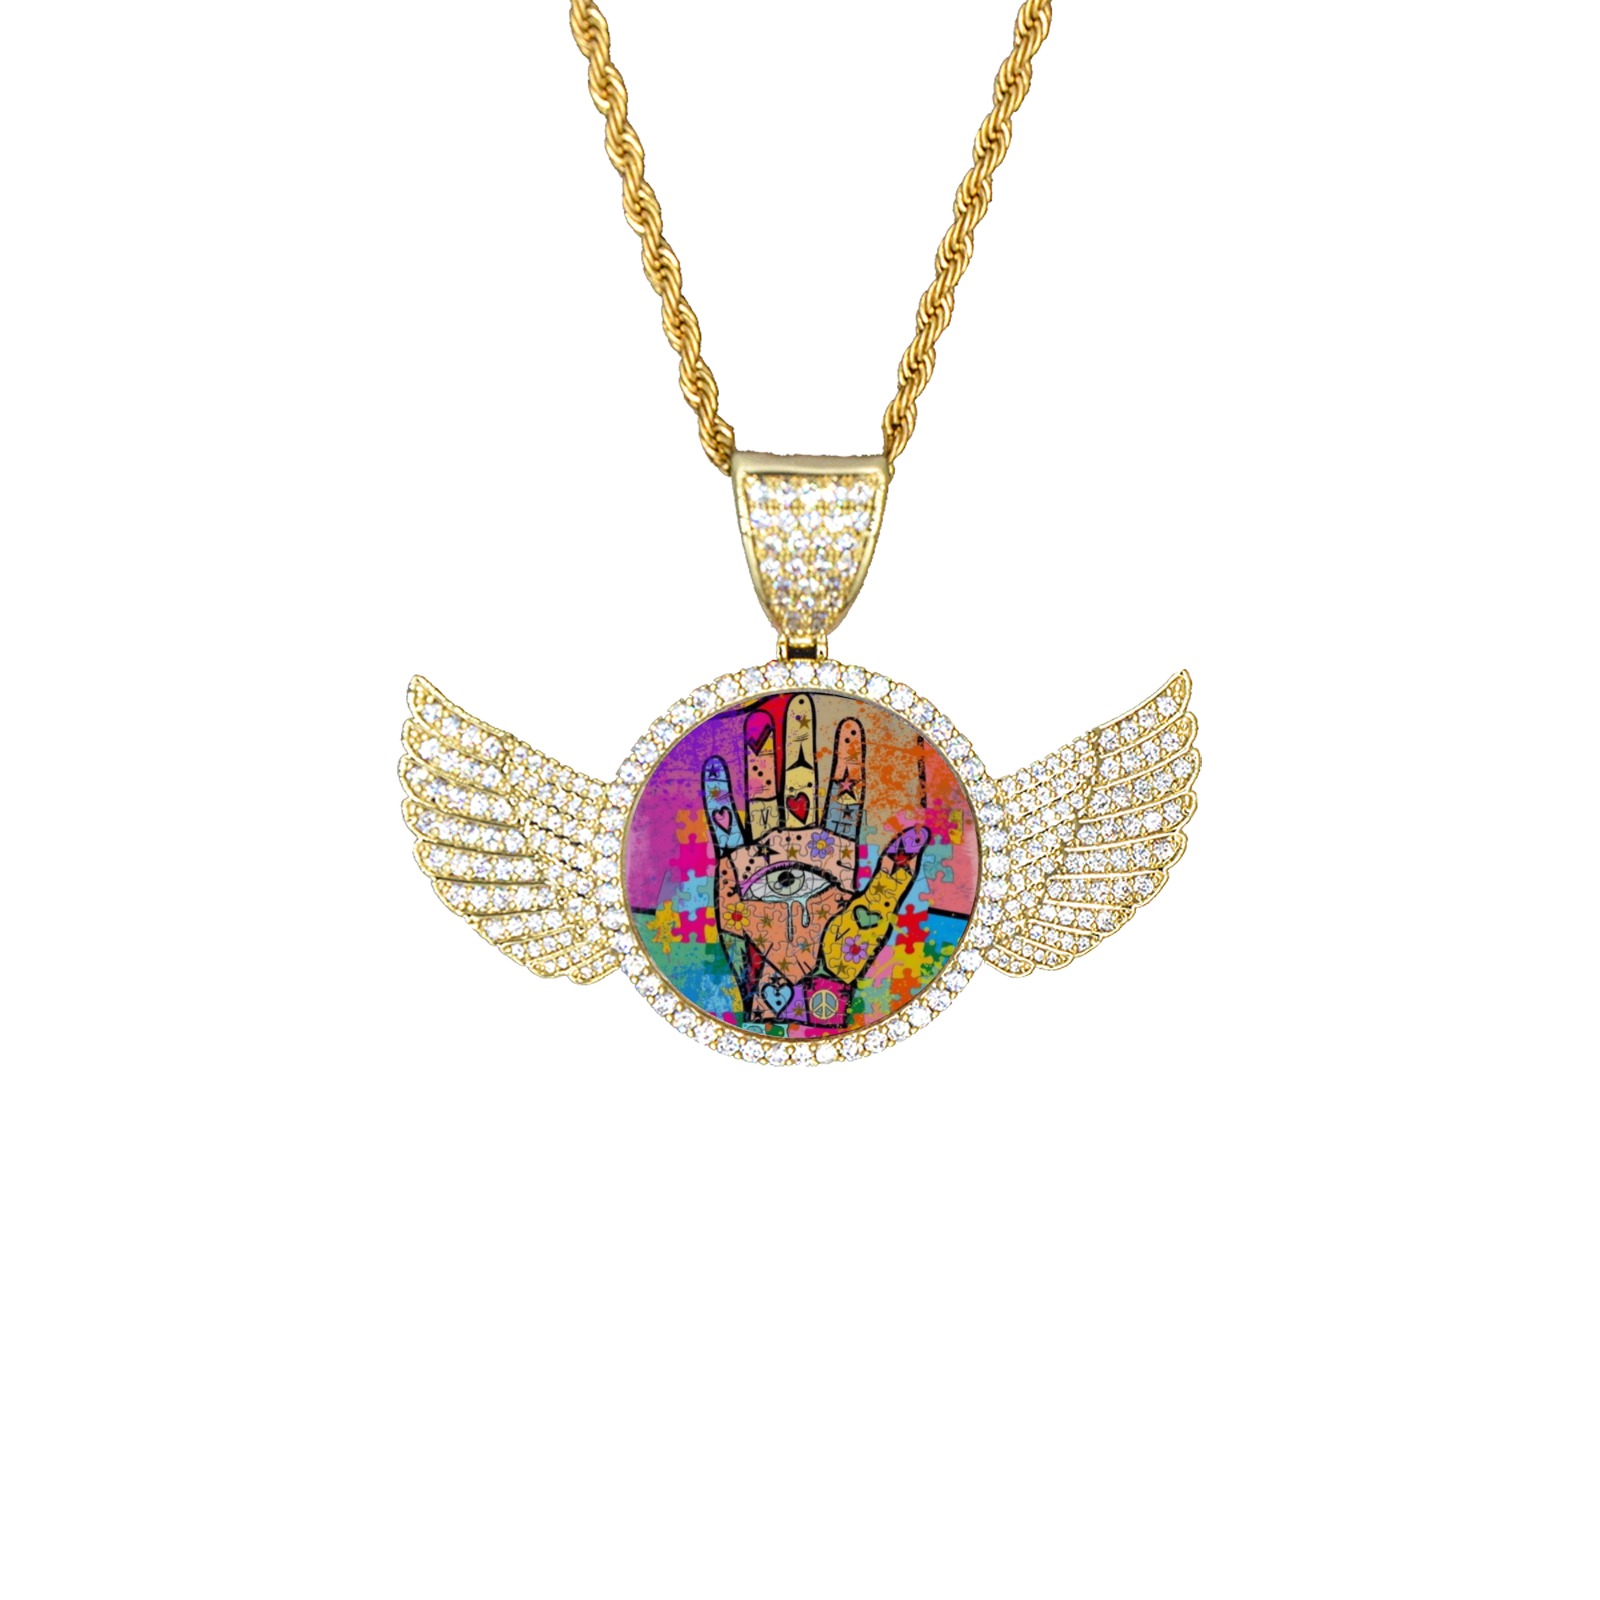 Hands up by Nico Bielow Wings Gold Photo Pendant with Rope Chain